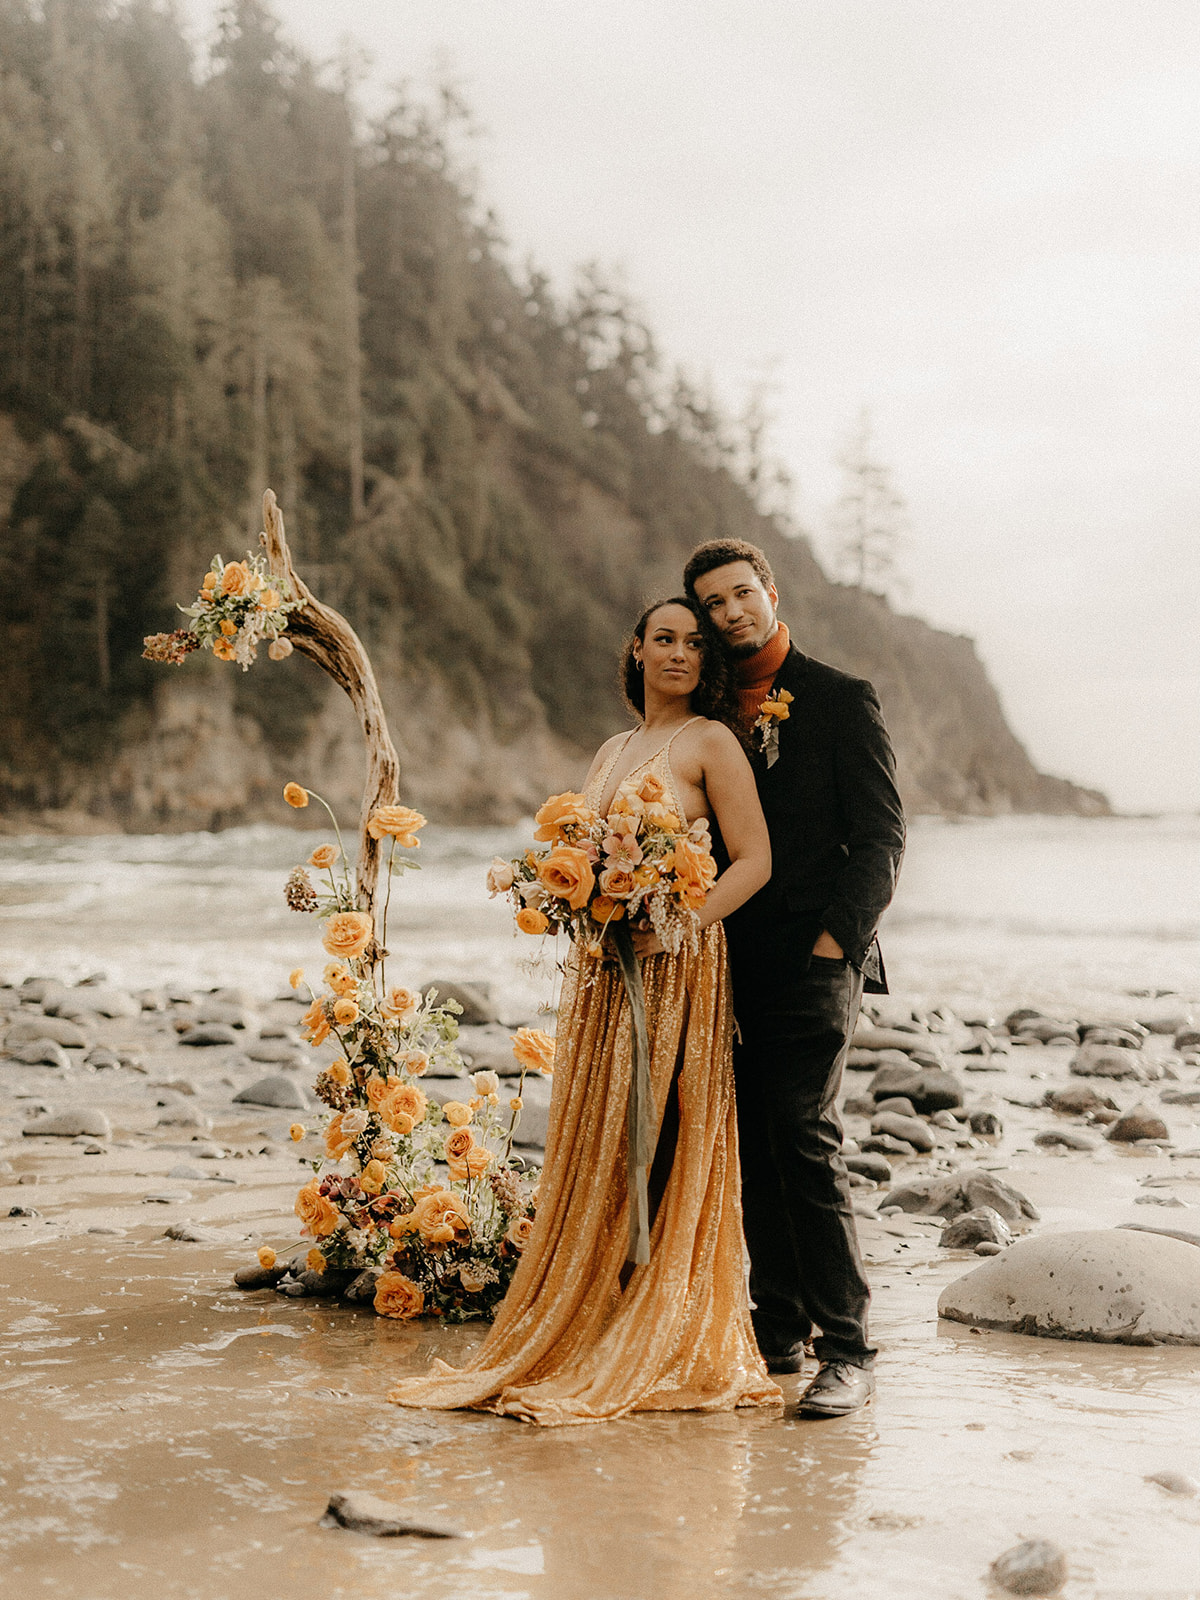 How to Elope in Oregon - The Ultimate Guide